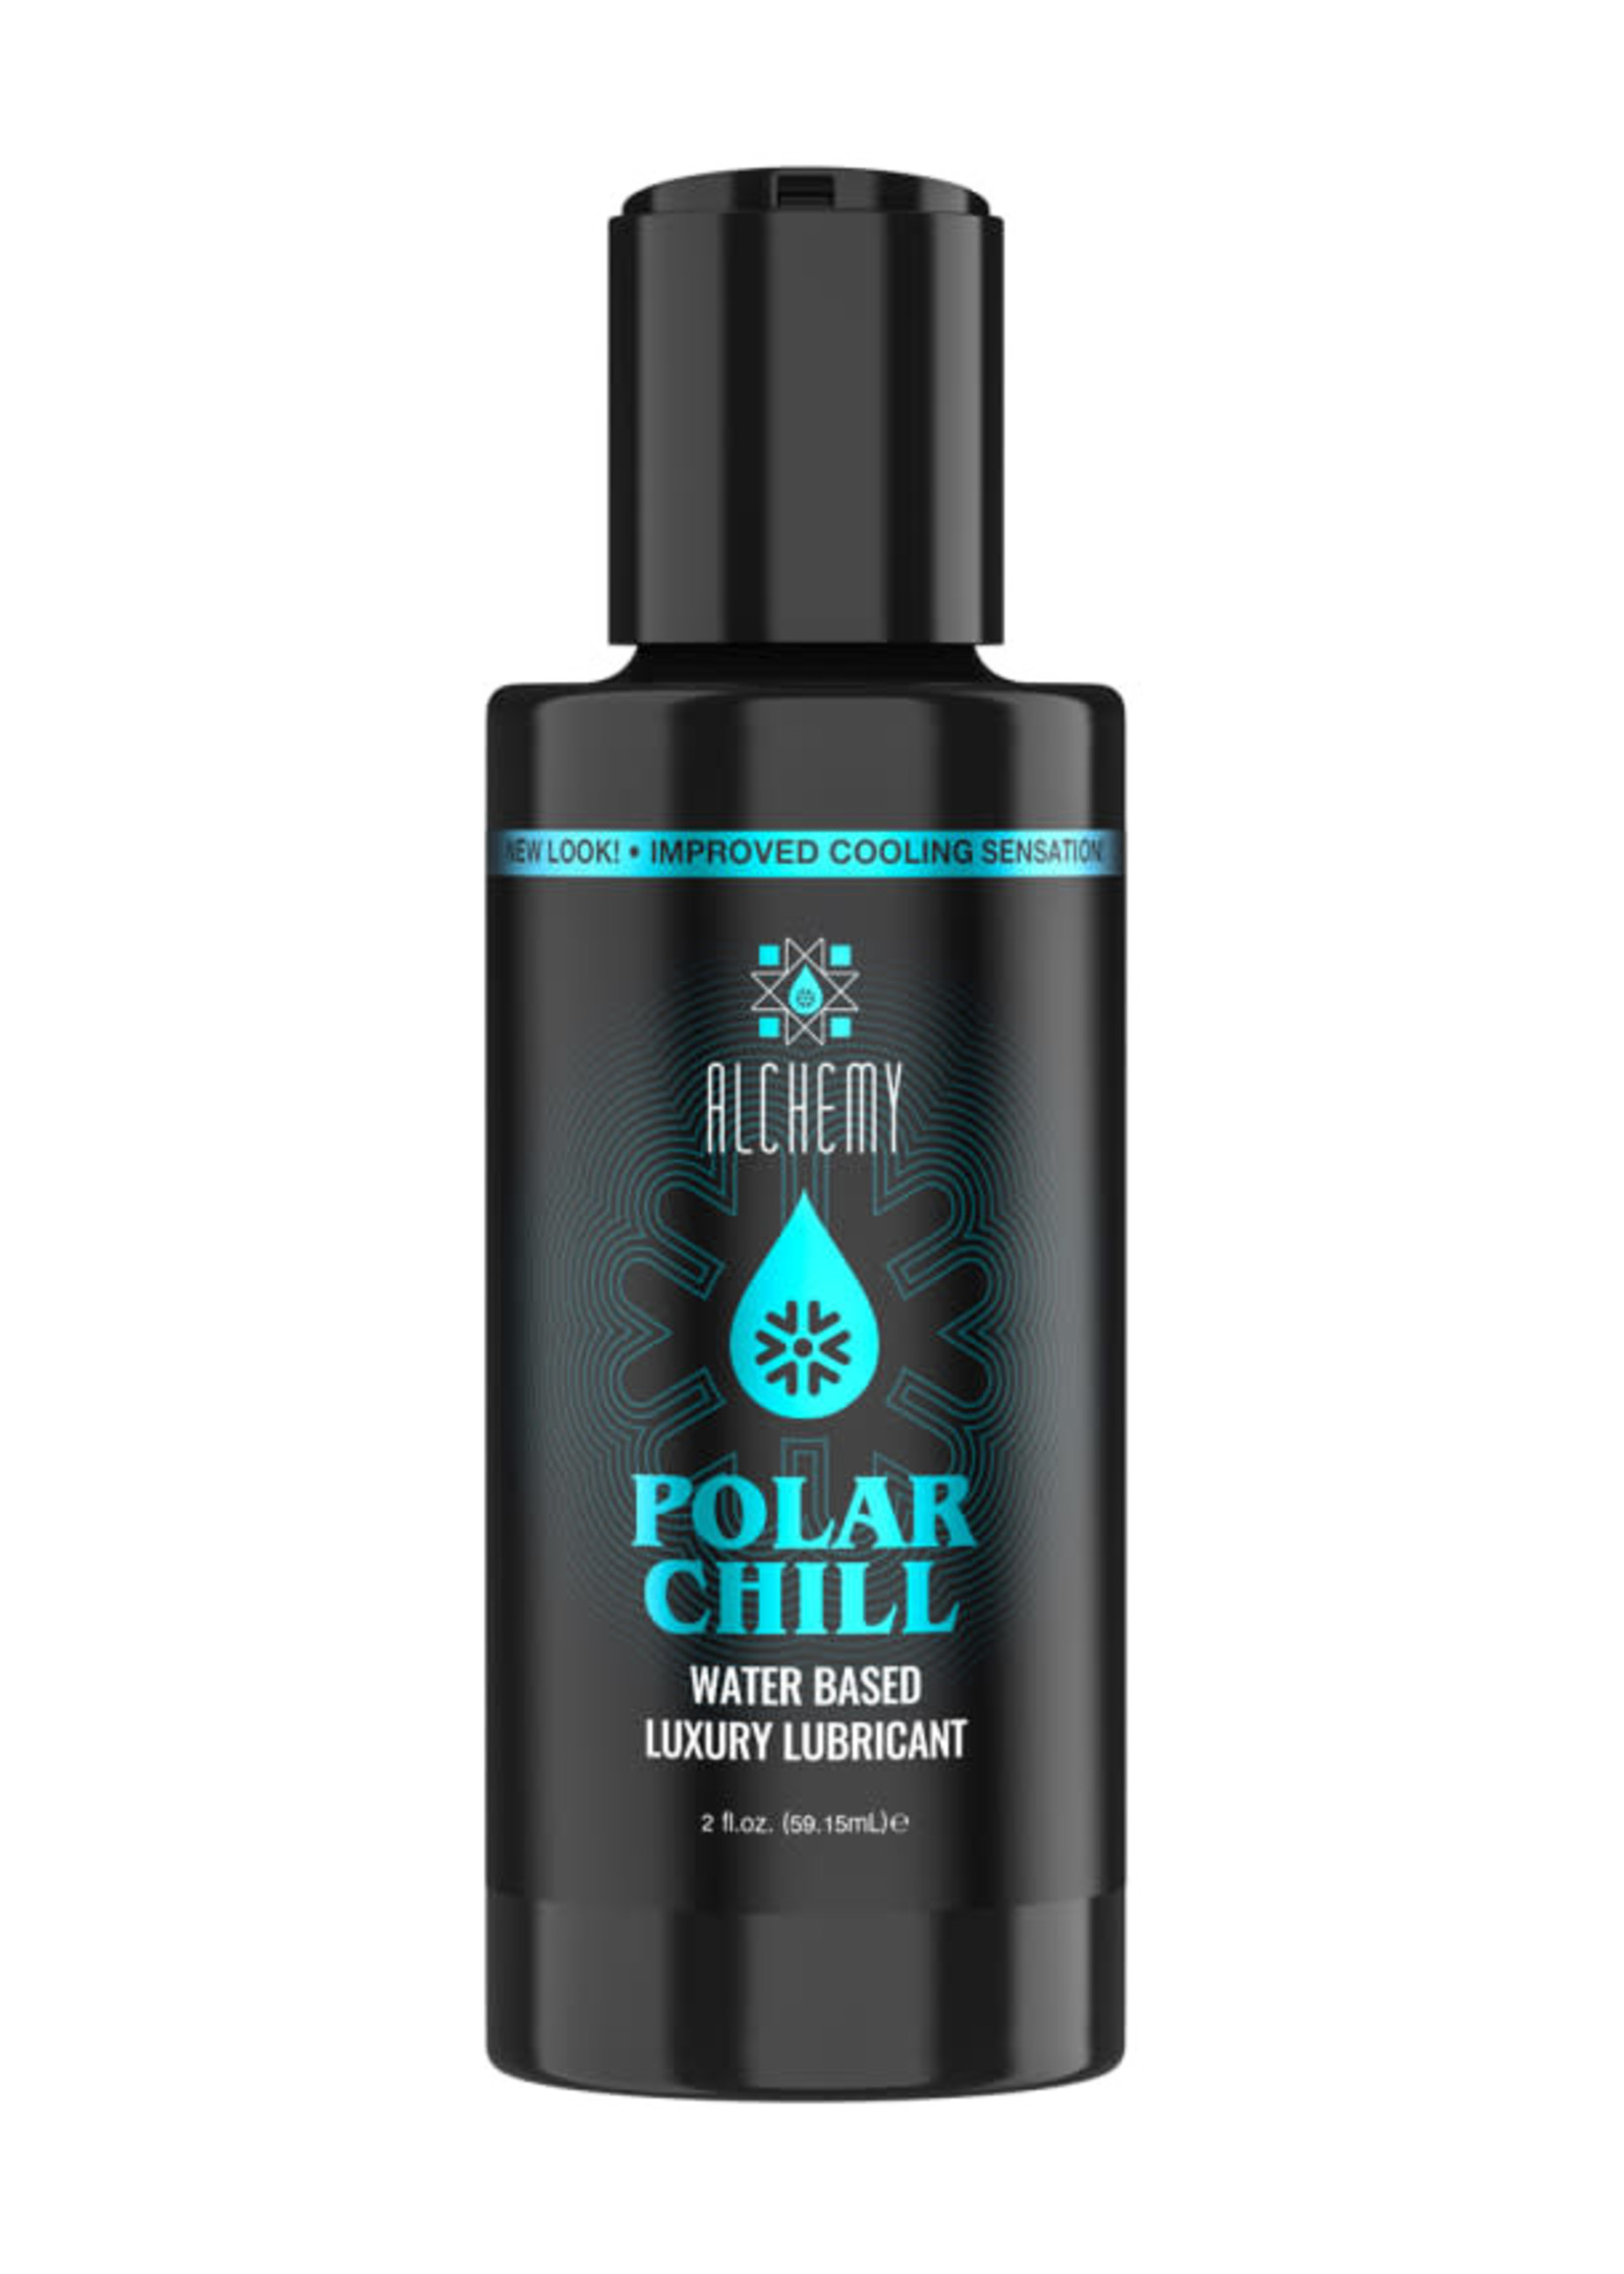 Alchemy Indulge Water Based Cooling Lubricant - 2 oz. Polar Chill